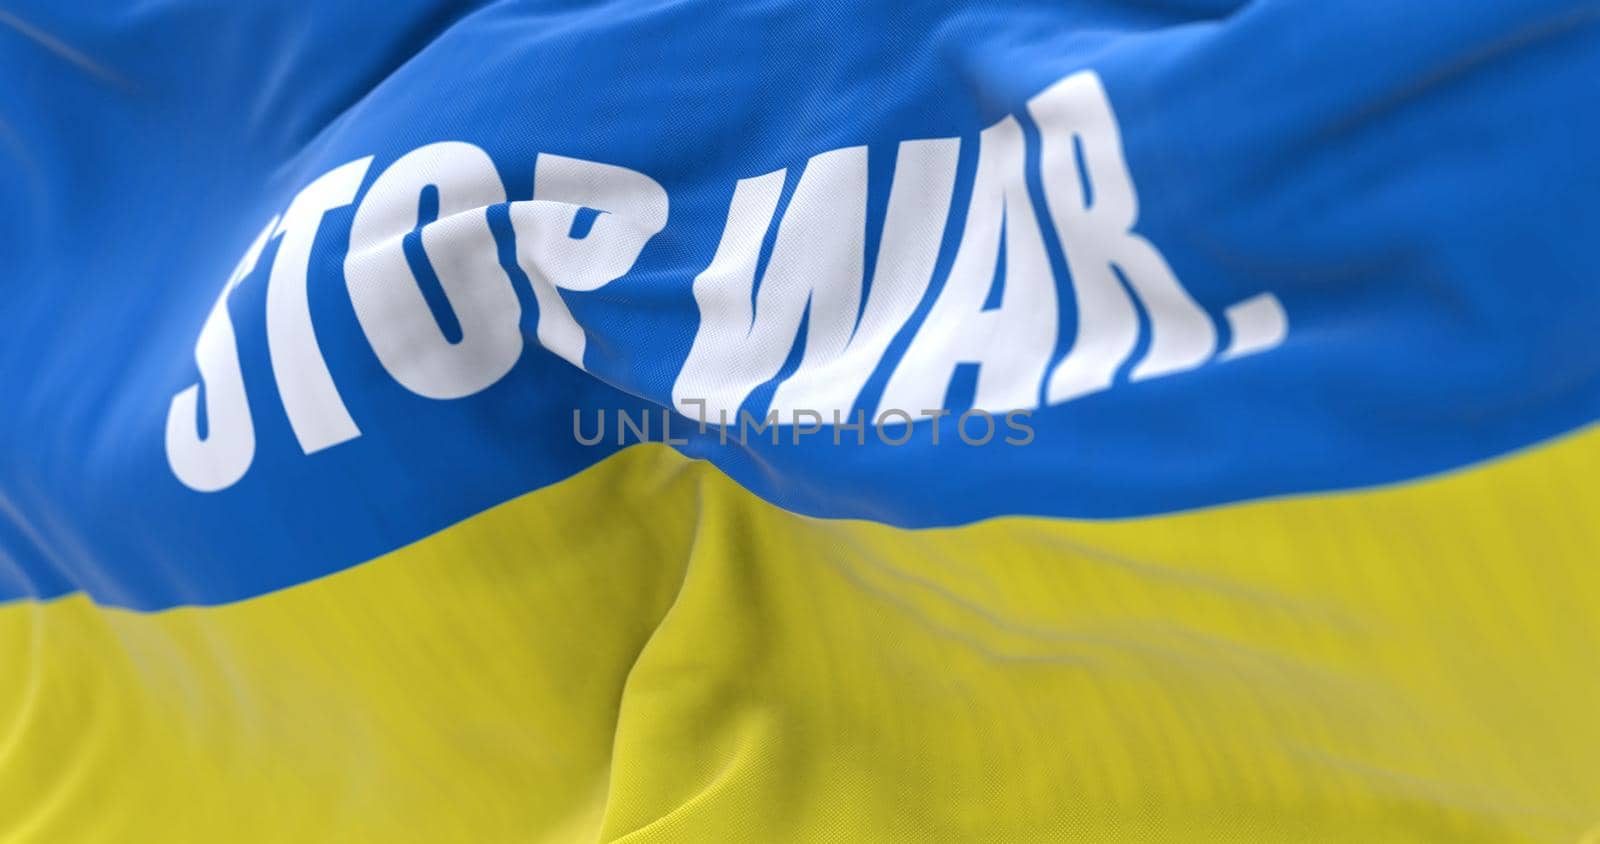 Detail of the national flag of Ukraine with the STOP WAR text waving in the wind by rarrarorro